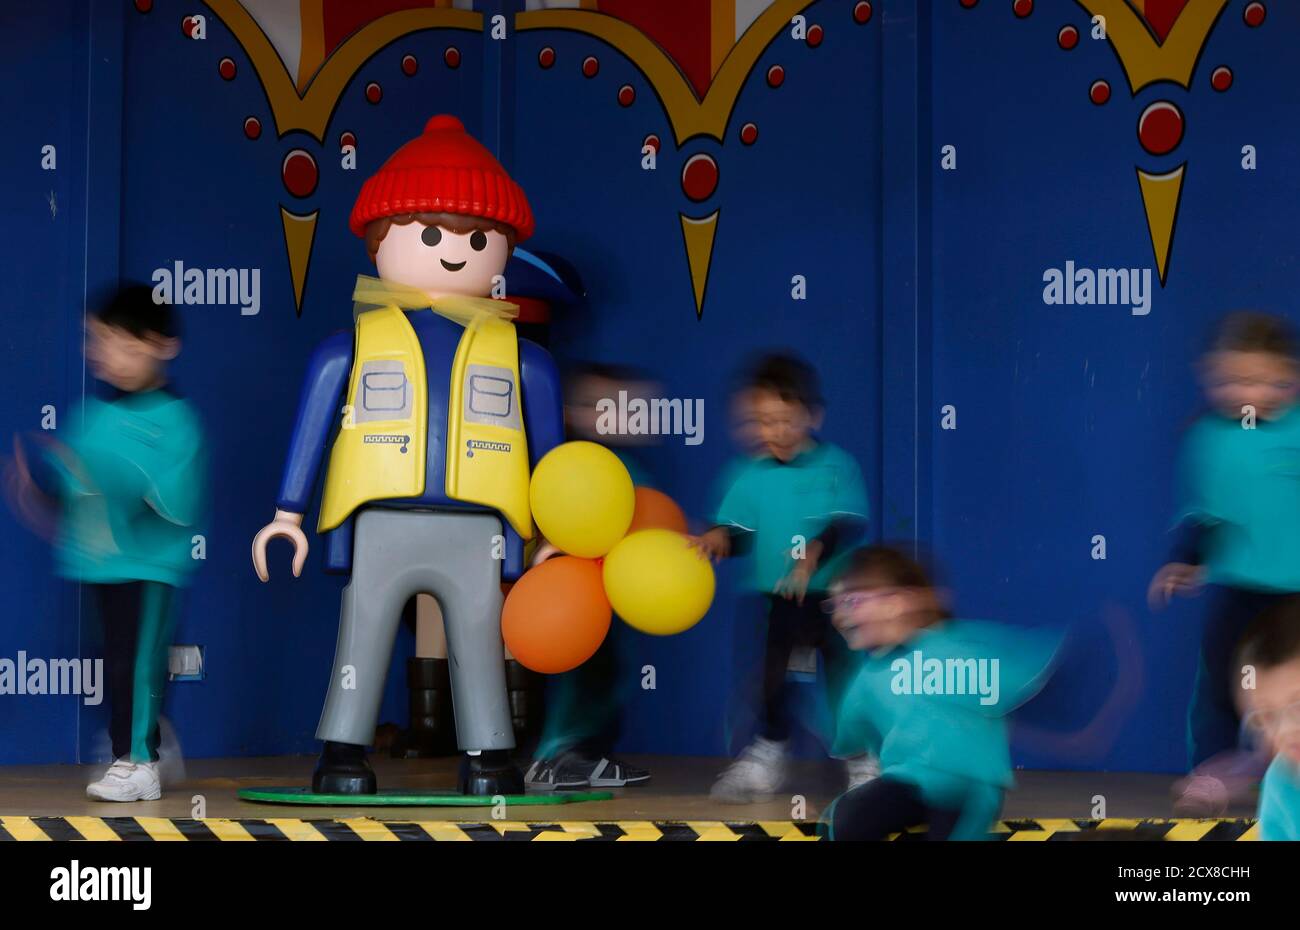 Schoolchildren play near a large Playmobil figure at the Playmobil FunPark,  adjacent to the Playmobil Malta factory in the Hal Far Industrial Estate  outside Valletta April 14, 2014. Playmobil is celebrating its